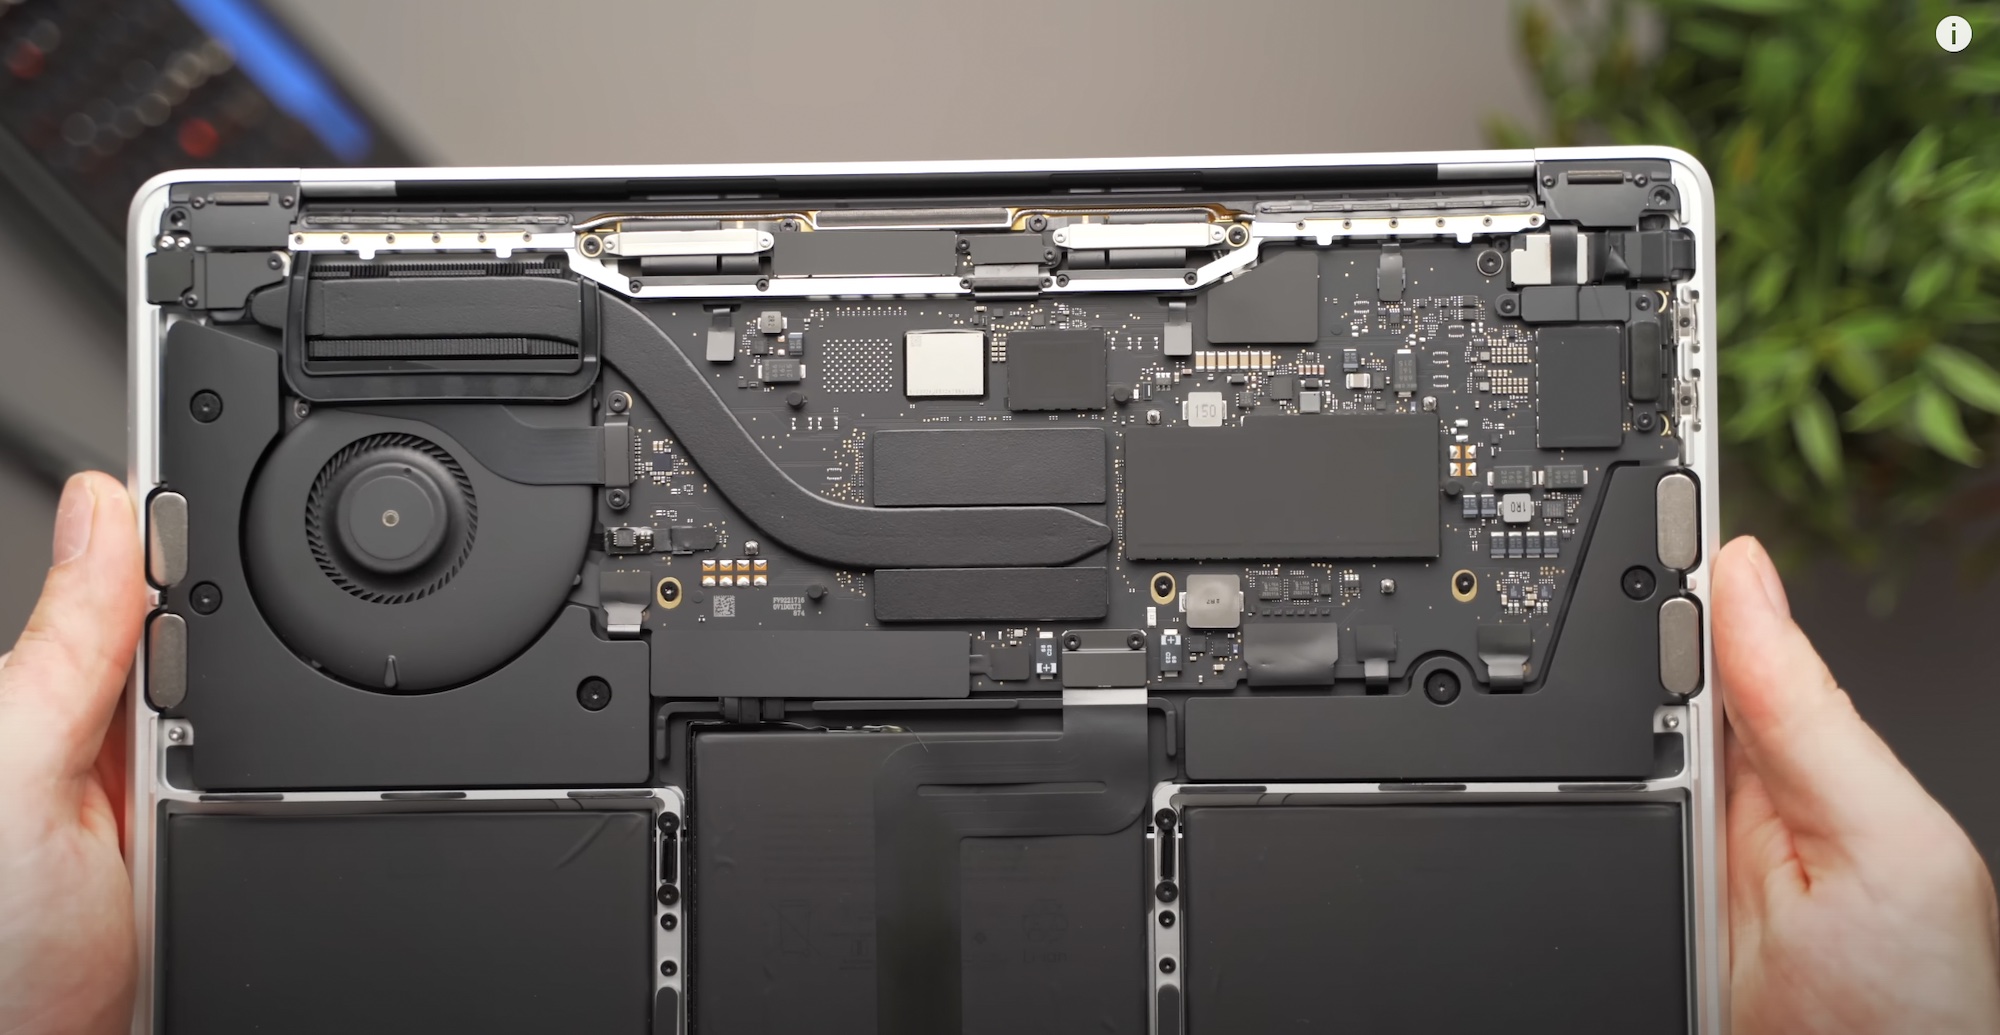 Entry-level M2 MacBook Pro has a slower SSD than M1 model